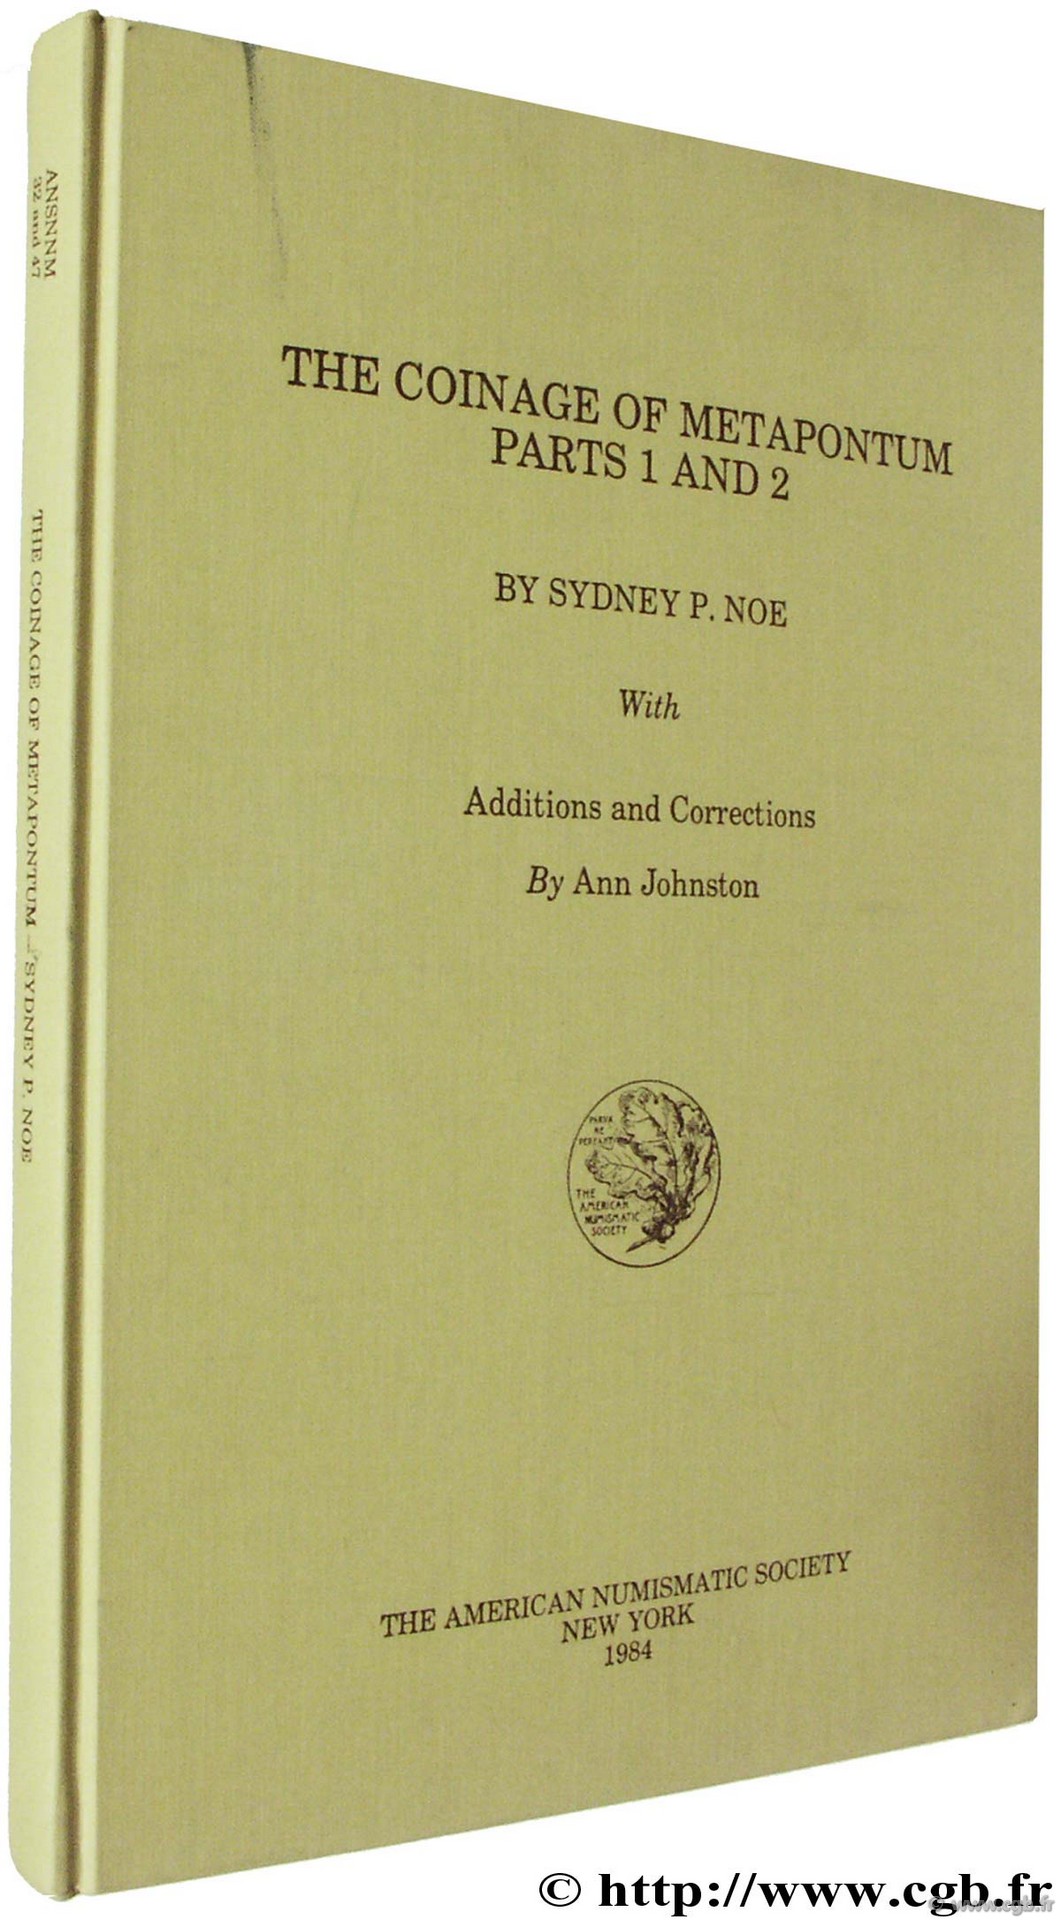 The Coinage of Métapontum, parts 1 and 2, with Additions and Corrections The American Numismatic Society NOE S.-P., JOHNSTON A.